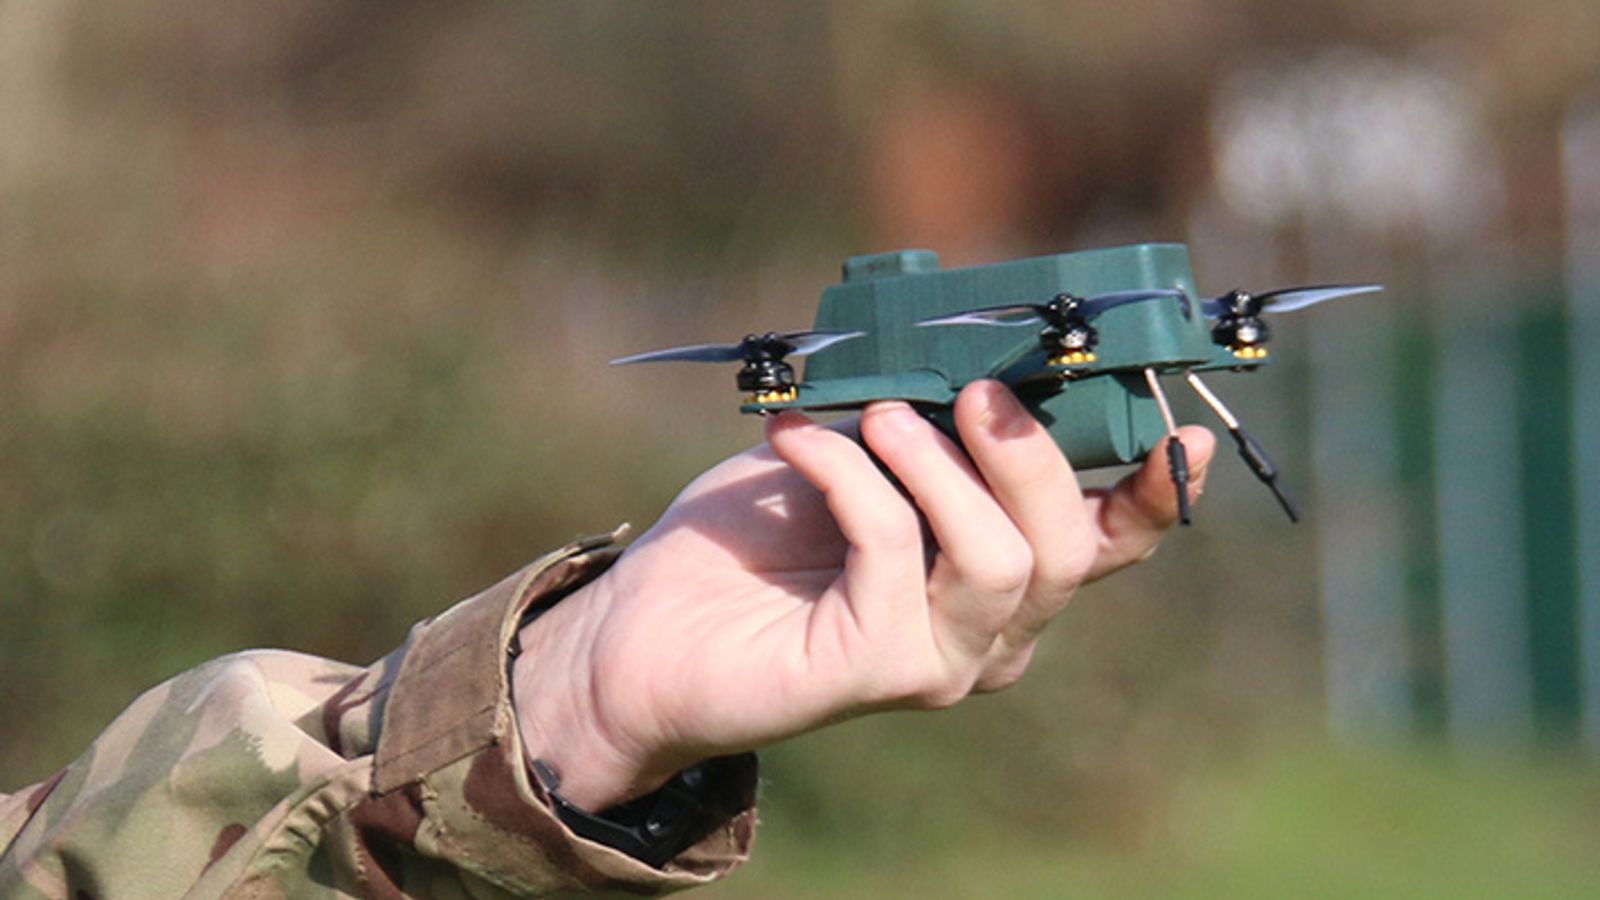 British Army receives stealthy ‘Bug’ drones that can snoop on targets more than a mile away